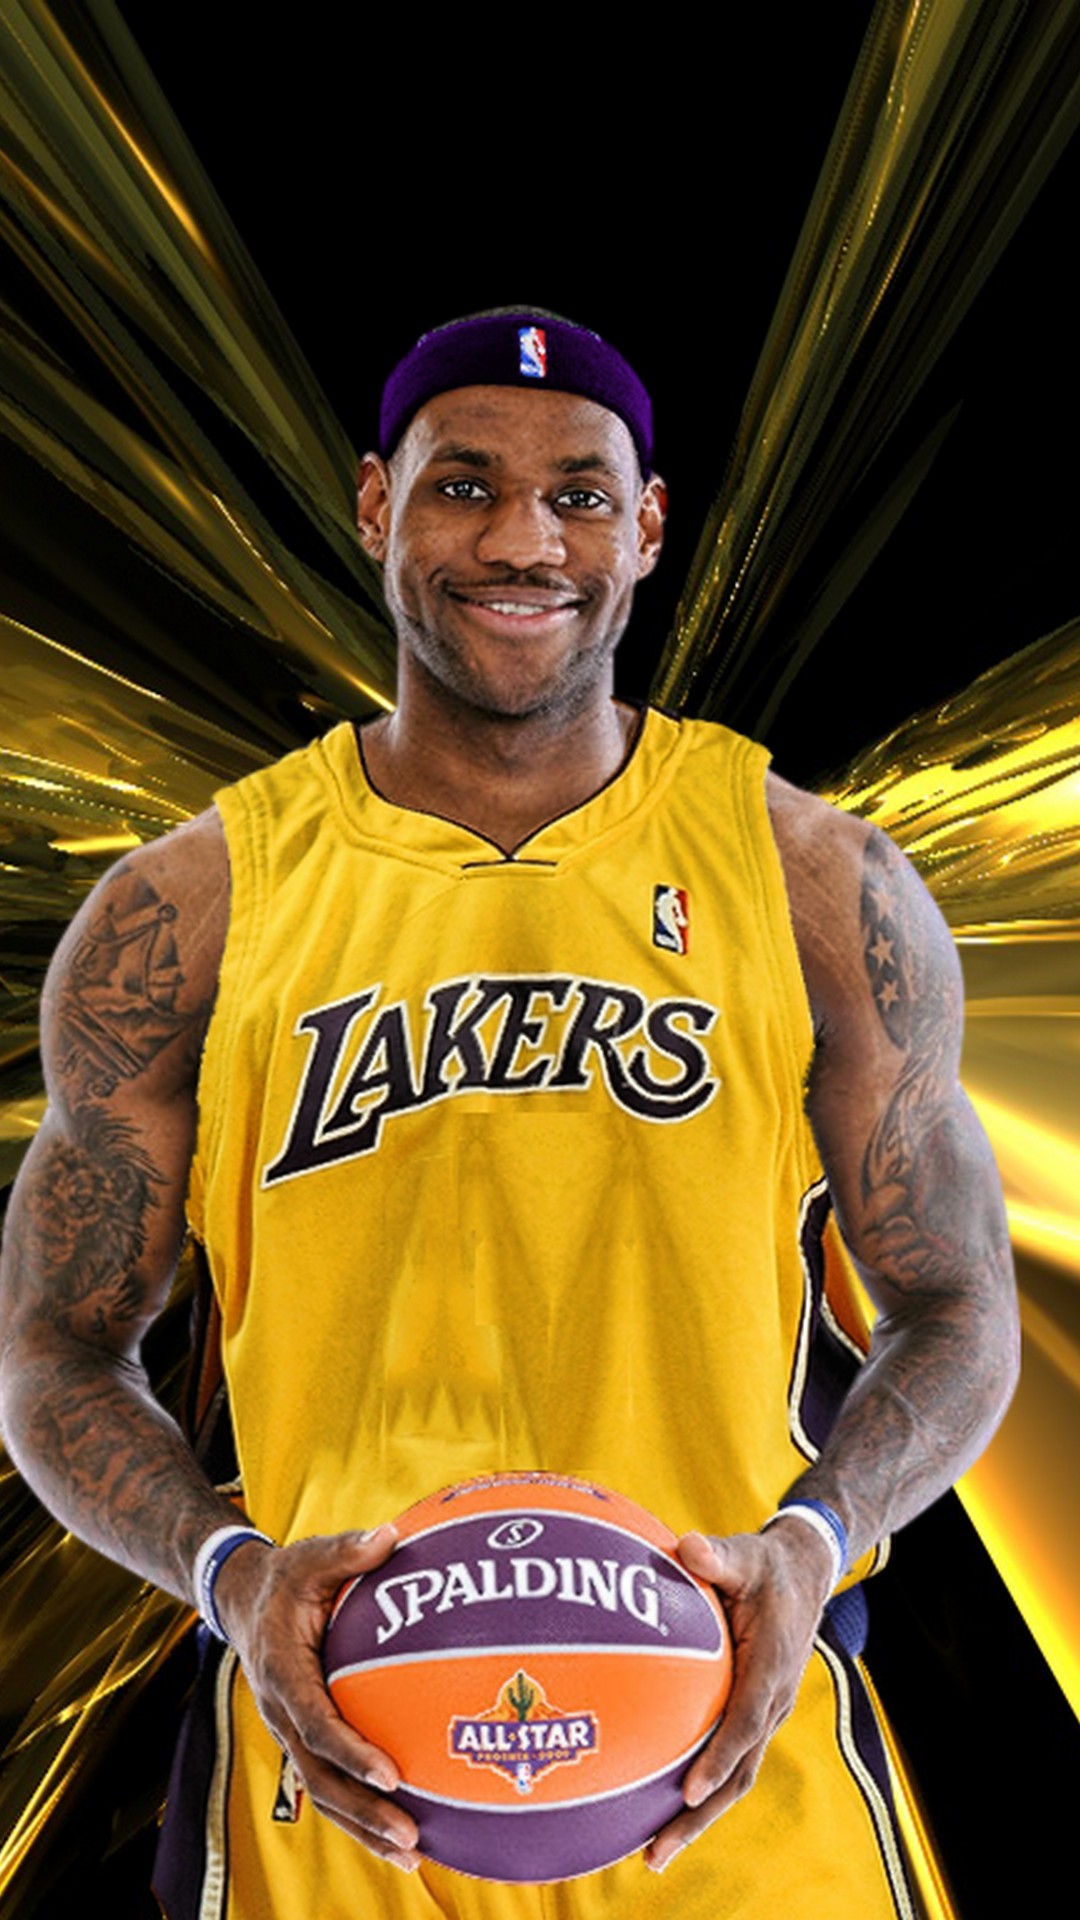 iPhone 8 Wallpaper Lebron James Lakers With high-resolution 1080X1920 pixel. You can use this wallpaper for your iPhone 5, 6, 7, 8, X backgrounds, Mobile Screensaver, or iPad Lock Screen